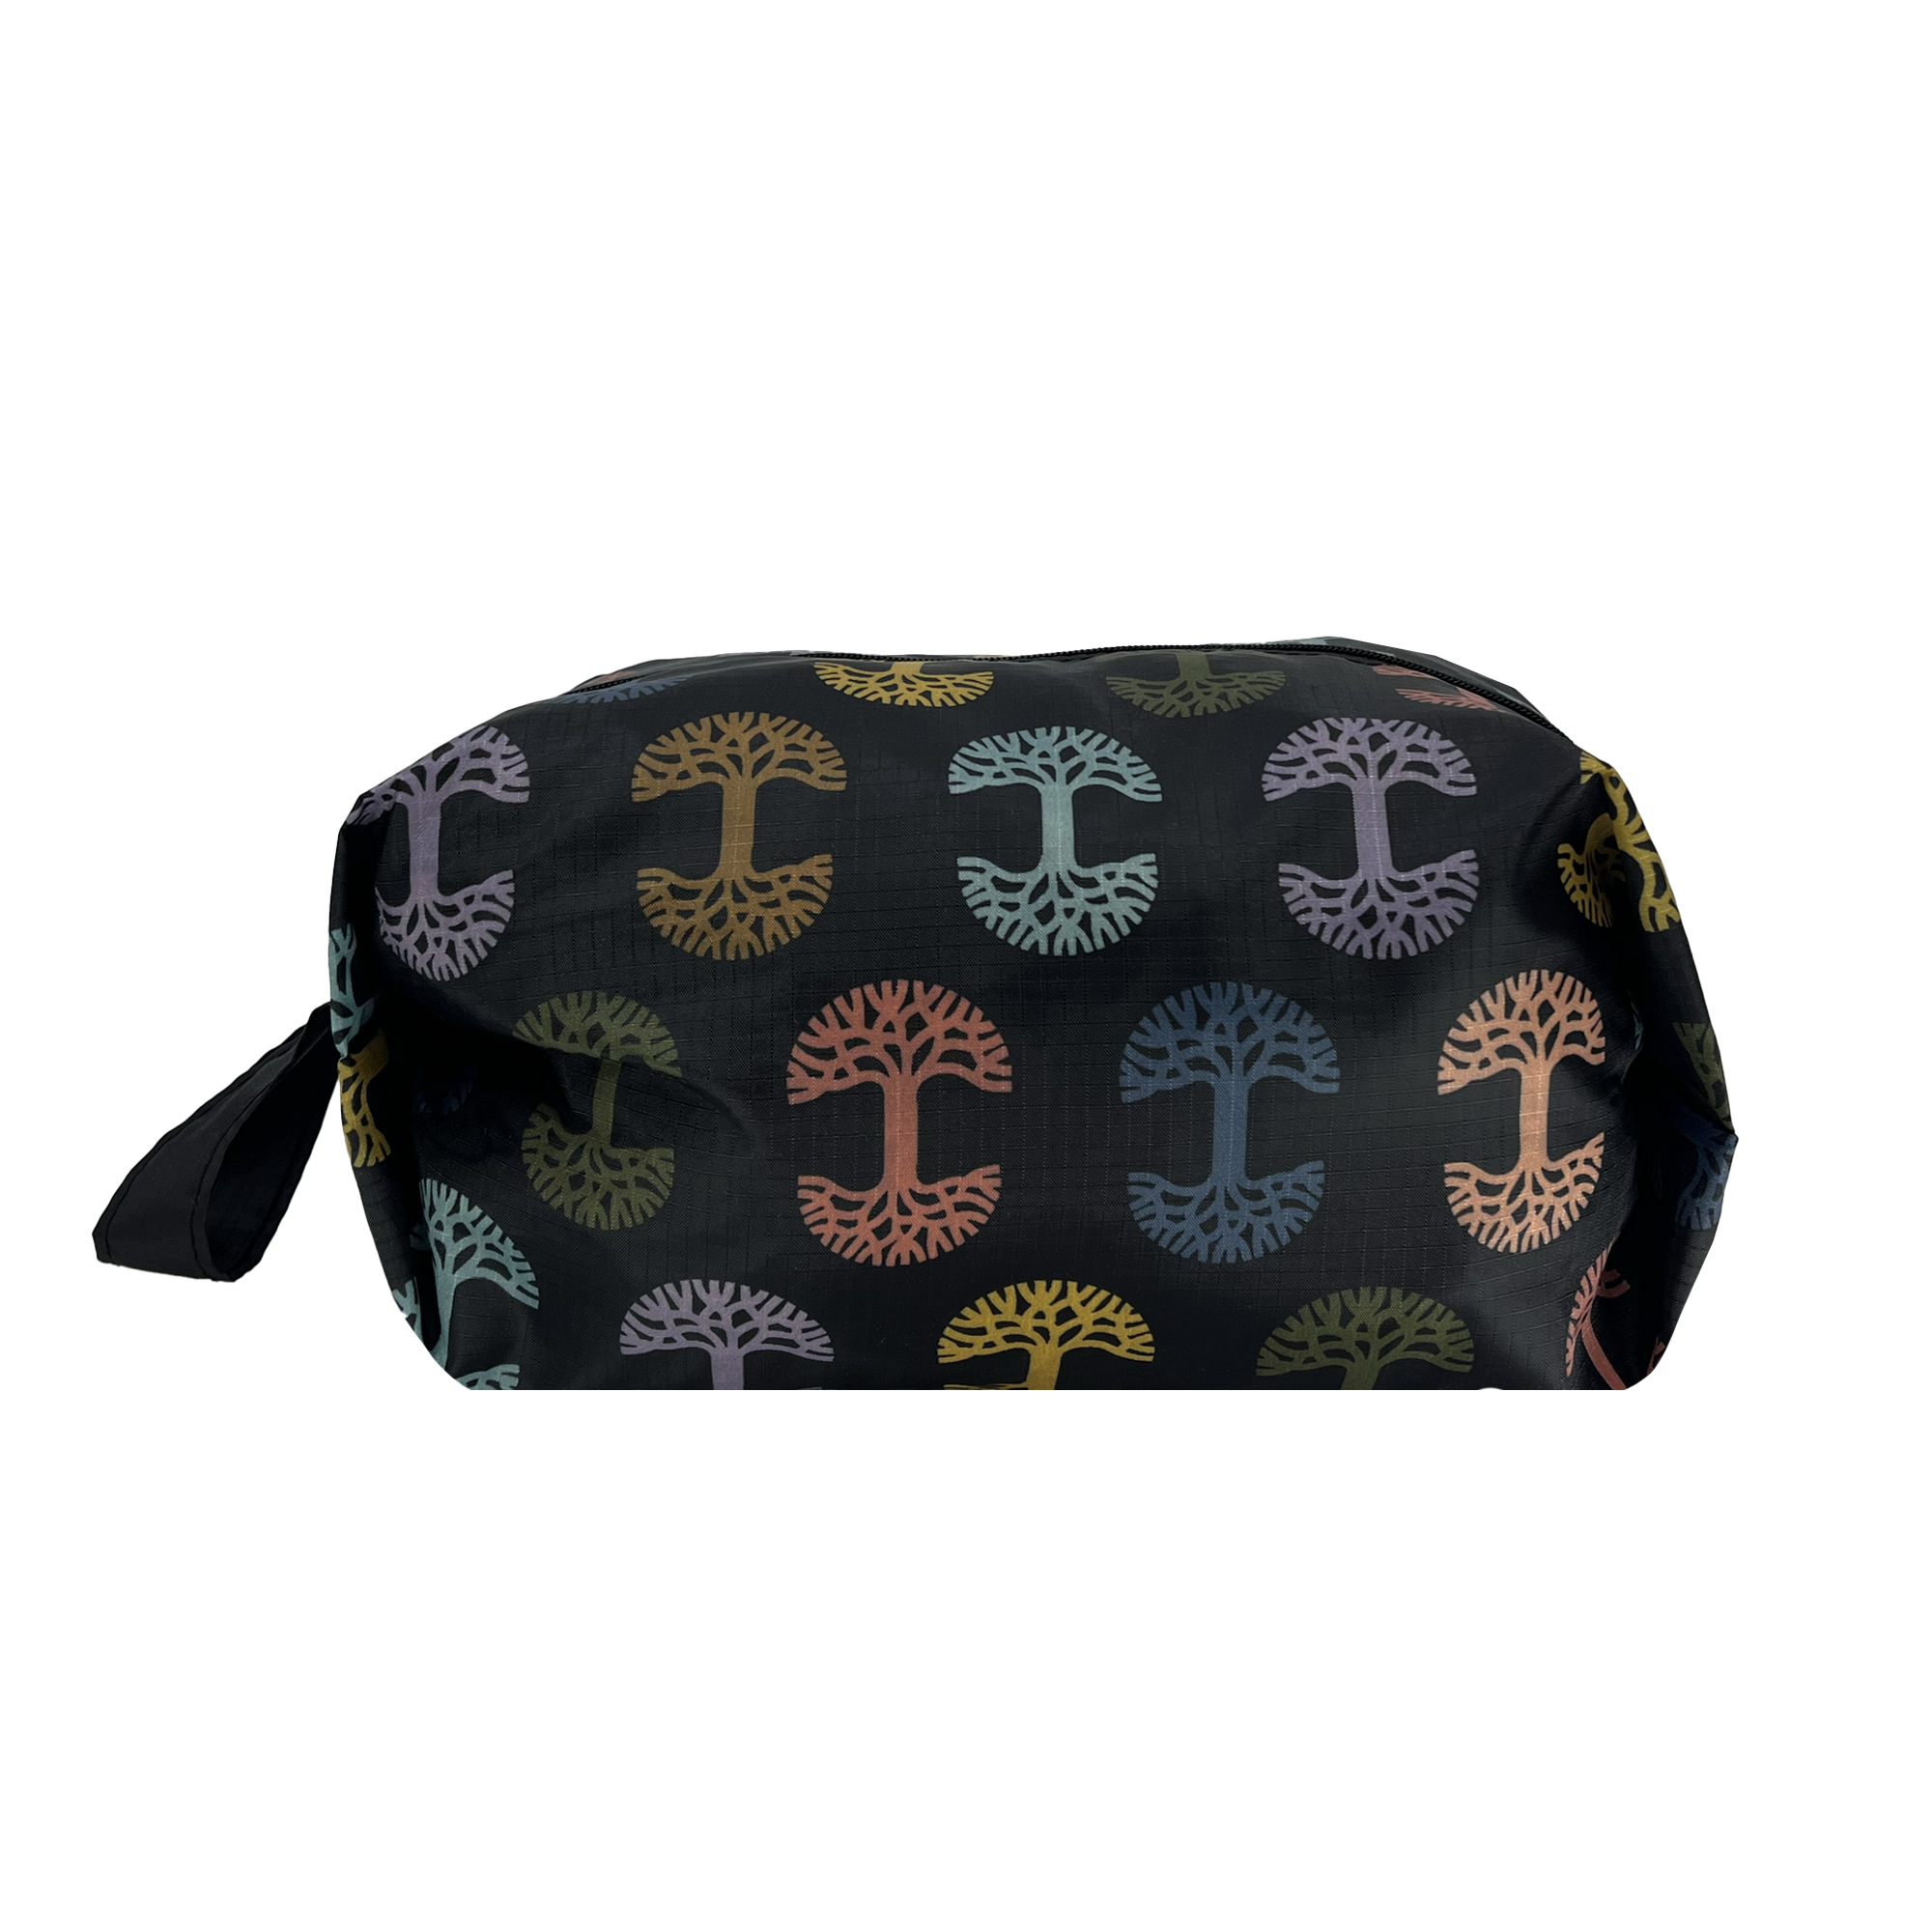 Front view of a medium-sized black zippered toiletry dopp bag with multi-color Oaklandish tree logos on repeat.